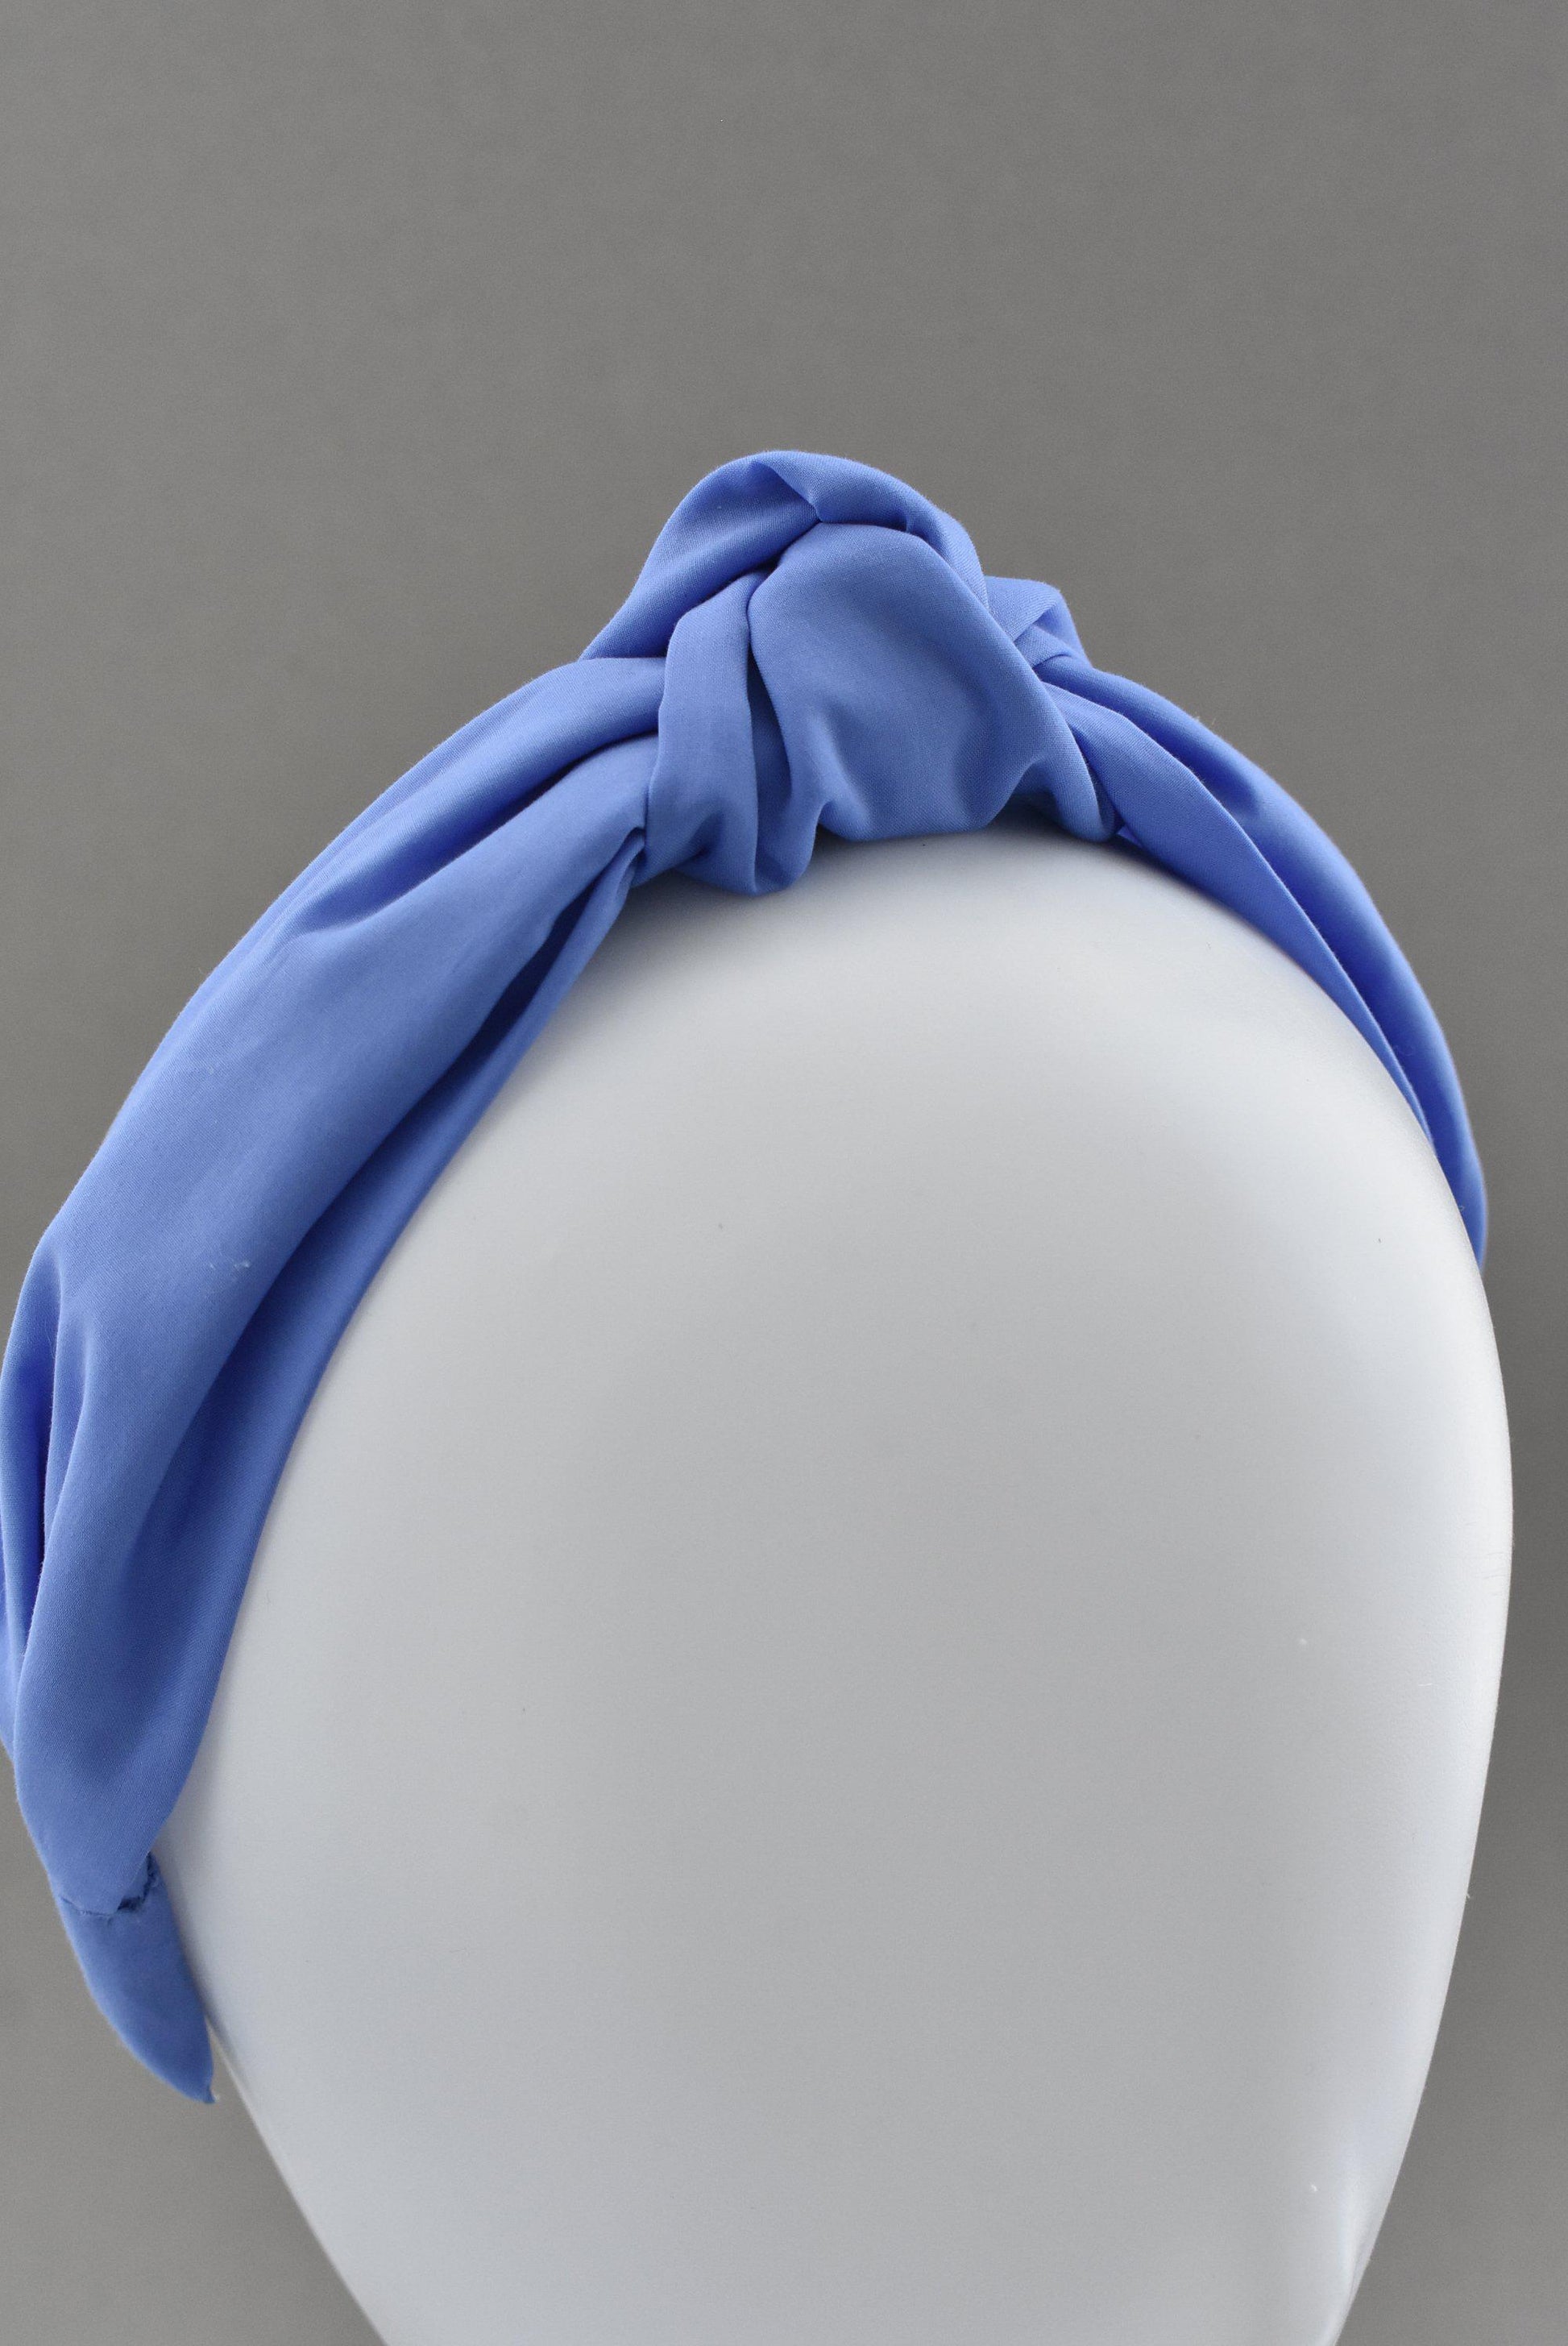 Ladies Tot Knot Alice band - Liberty of London Periwinkle blue - Tot Knots of Brighton